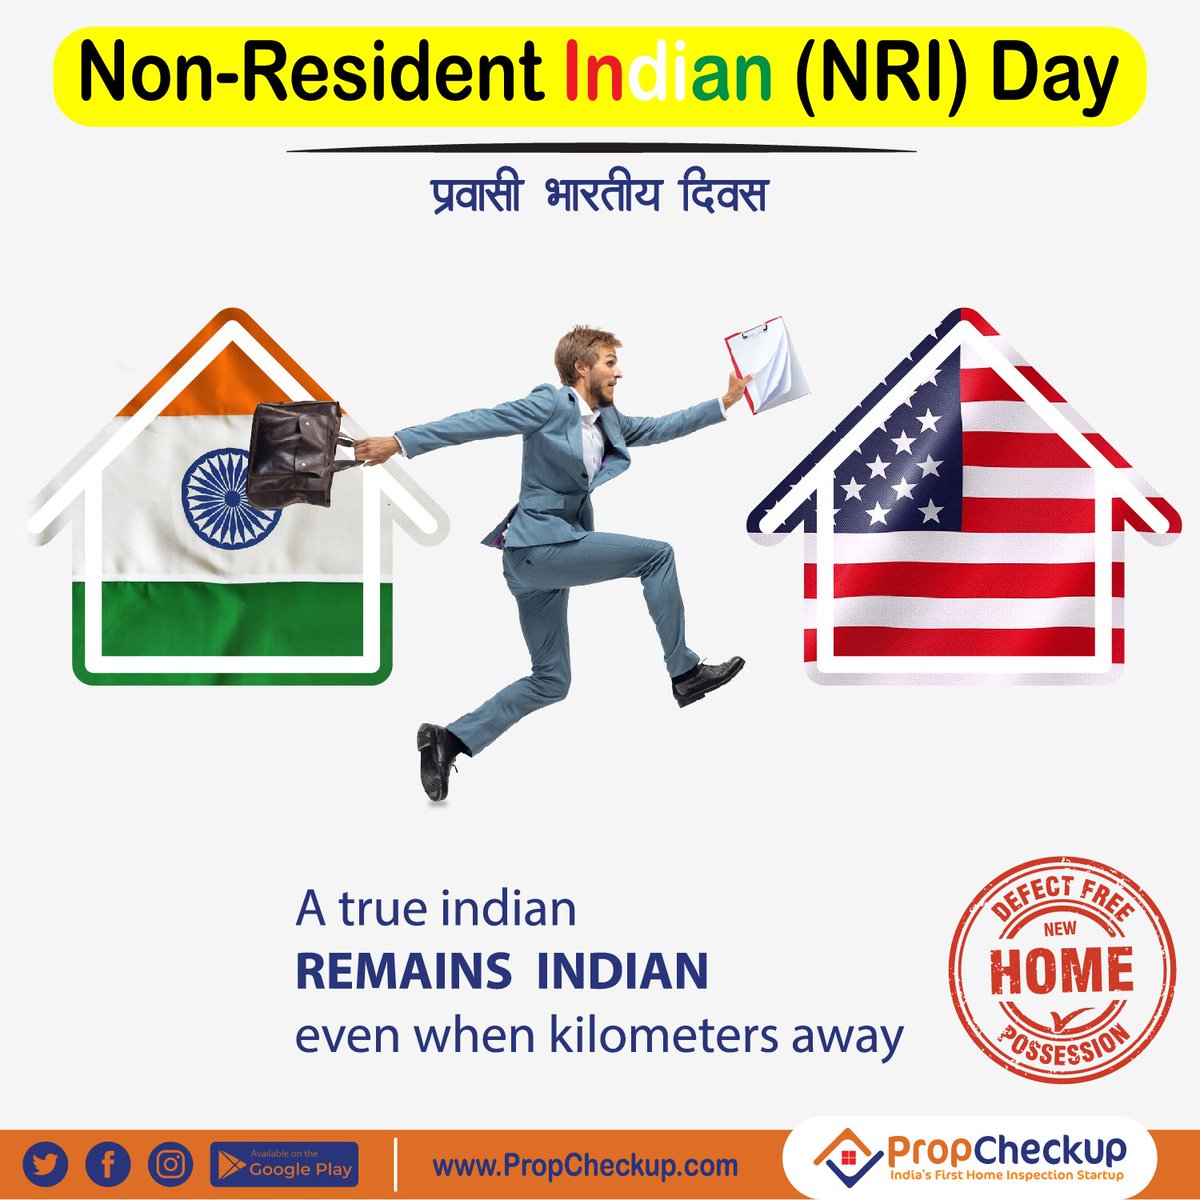 Exclusive Home Inspection Services For NRIs Homebuyers. 

Happy NRIs Day🇮🇳

#propcheckup #homeinspections🏚 #homeinspectionday  #newhomeowner #newhomebuyers #maharashtra_ig #mumbai #pune #sürat #thane #indianwedding #india #NRIDay